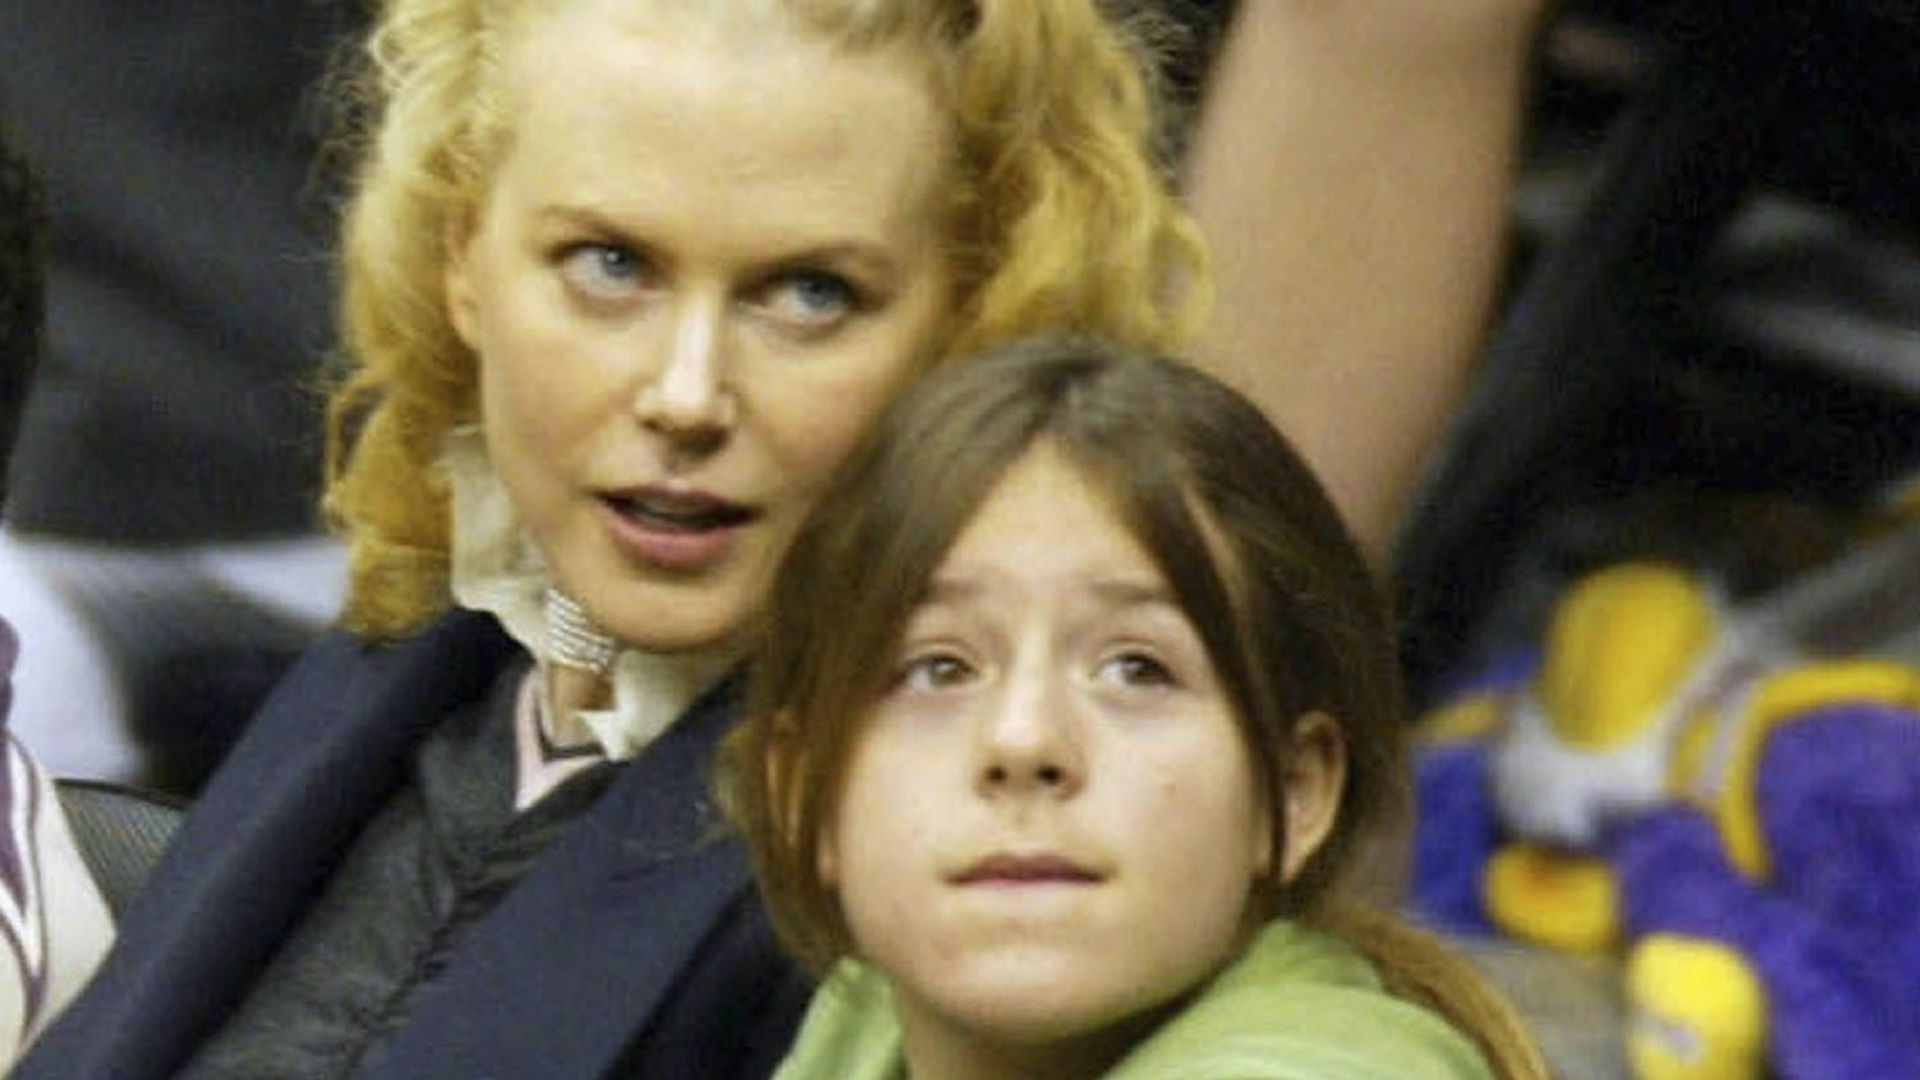 Nicole Kidman and Tom Cruise's daughter stuns fans with unexpected new look